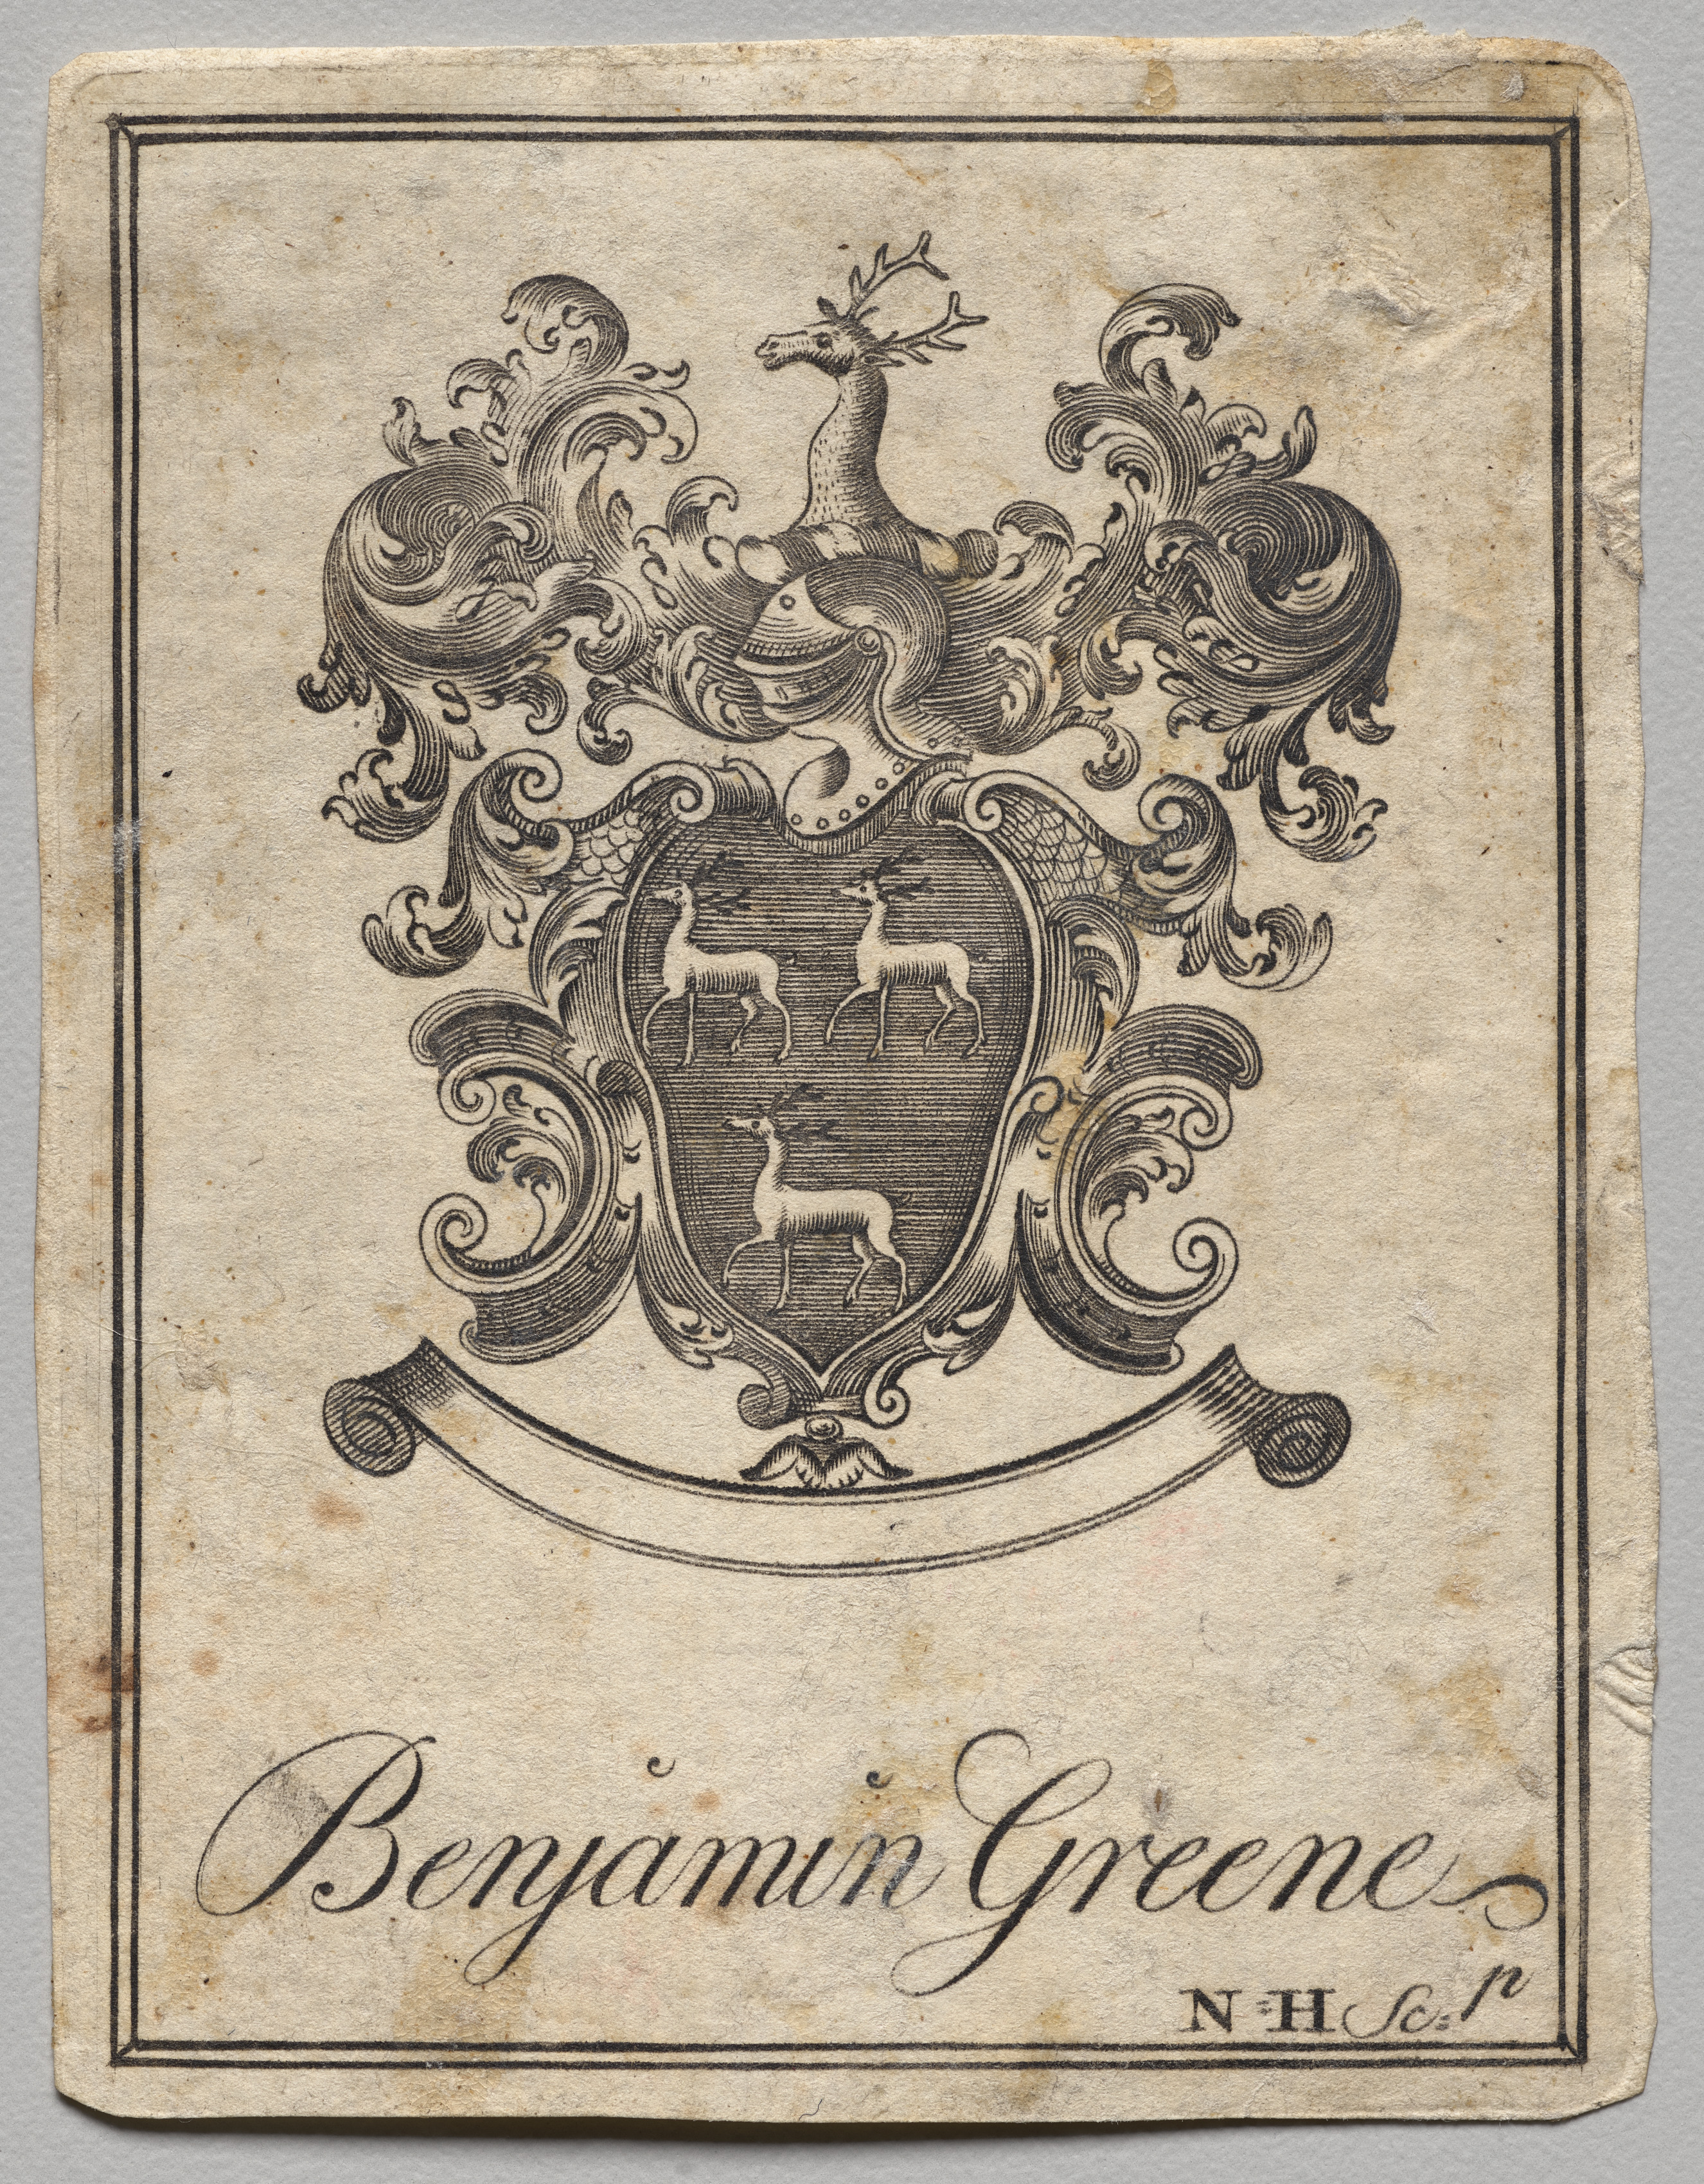 Bookplate:  Coat of Arms with Benjamin Greene inscribed